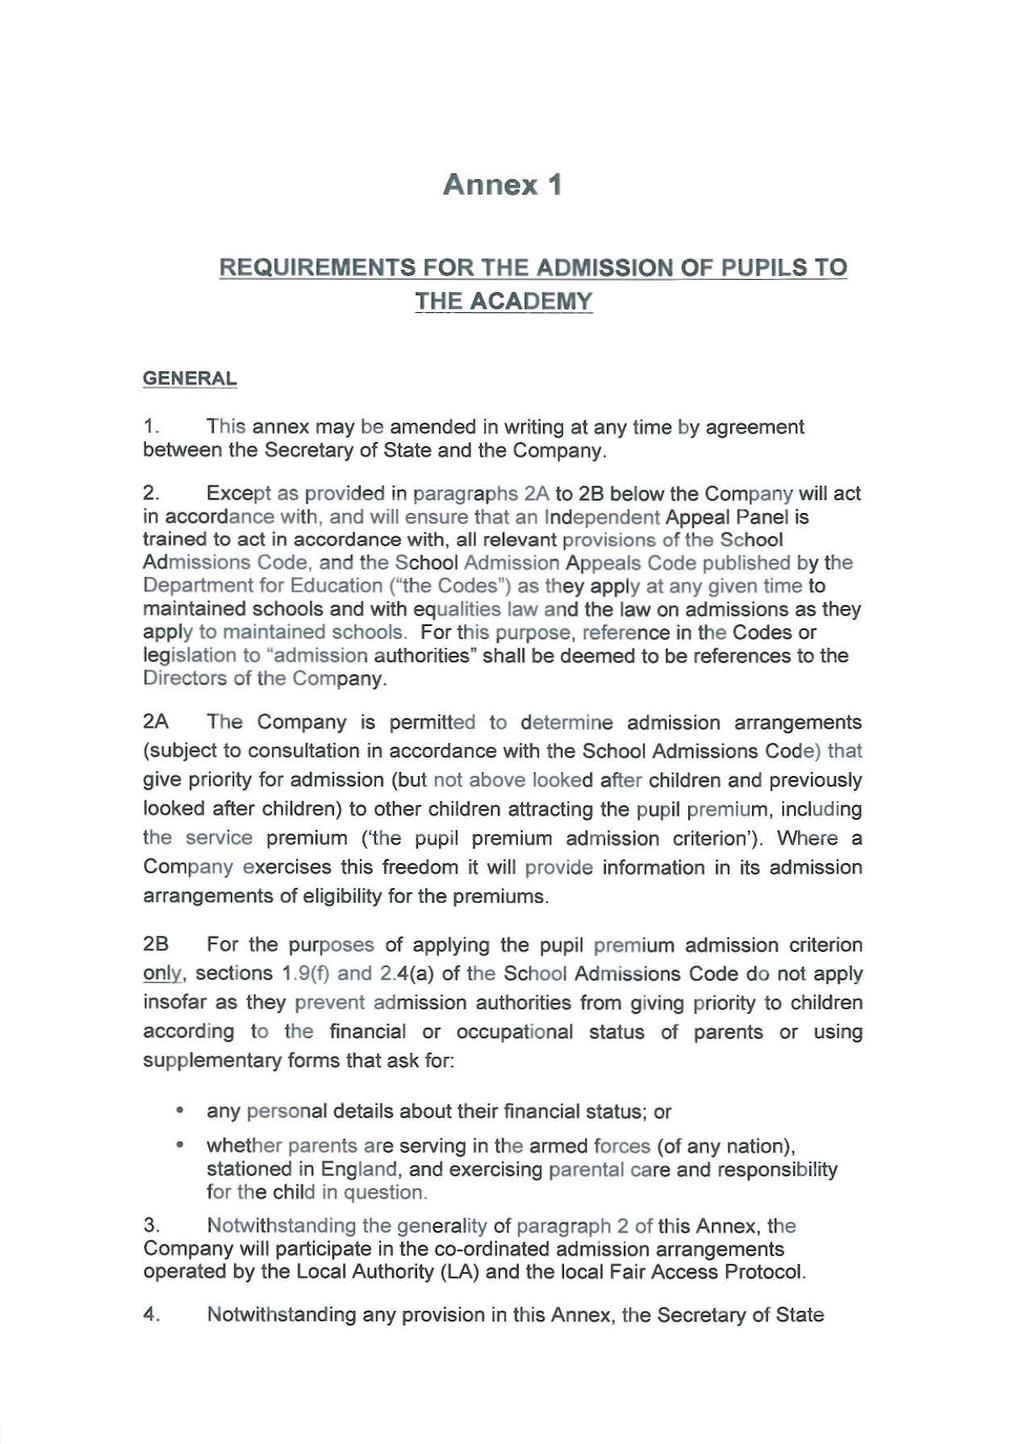 Annex 1 REQUIREMENTS FOR THE ADMISSION OF PUPILS TO THE ACADEMY GENERAL 1. This annex may be amended in writing at any time by agreement between the Secretary of State and the Company. 2.